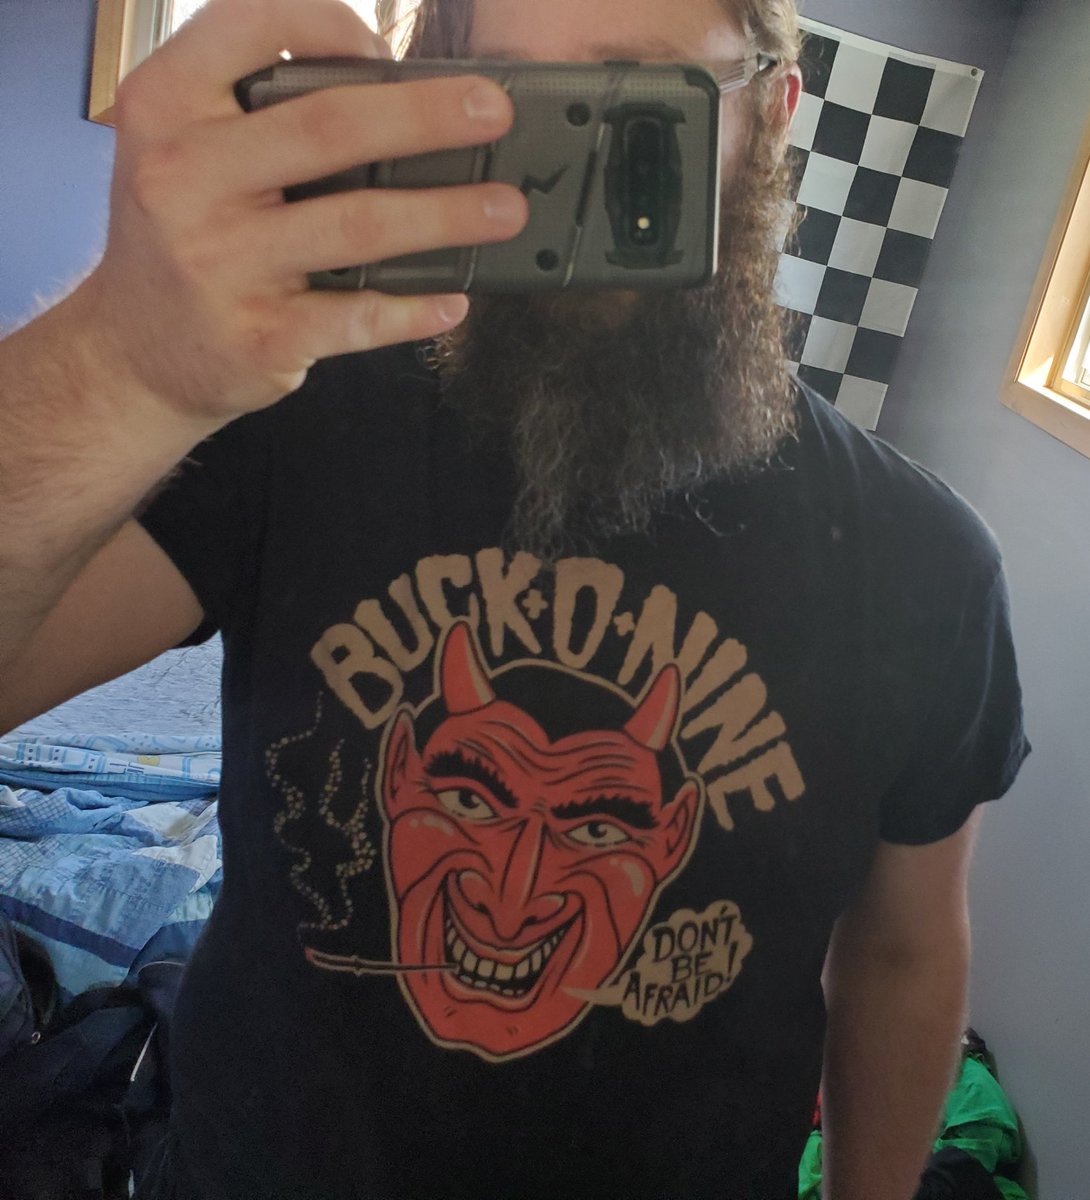 Shirt 26 is from a show I went to basically on a whim and it was so much fun and the band put on a killer live show. Buck O Nine